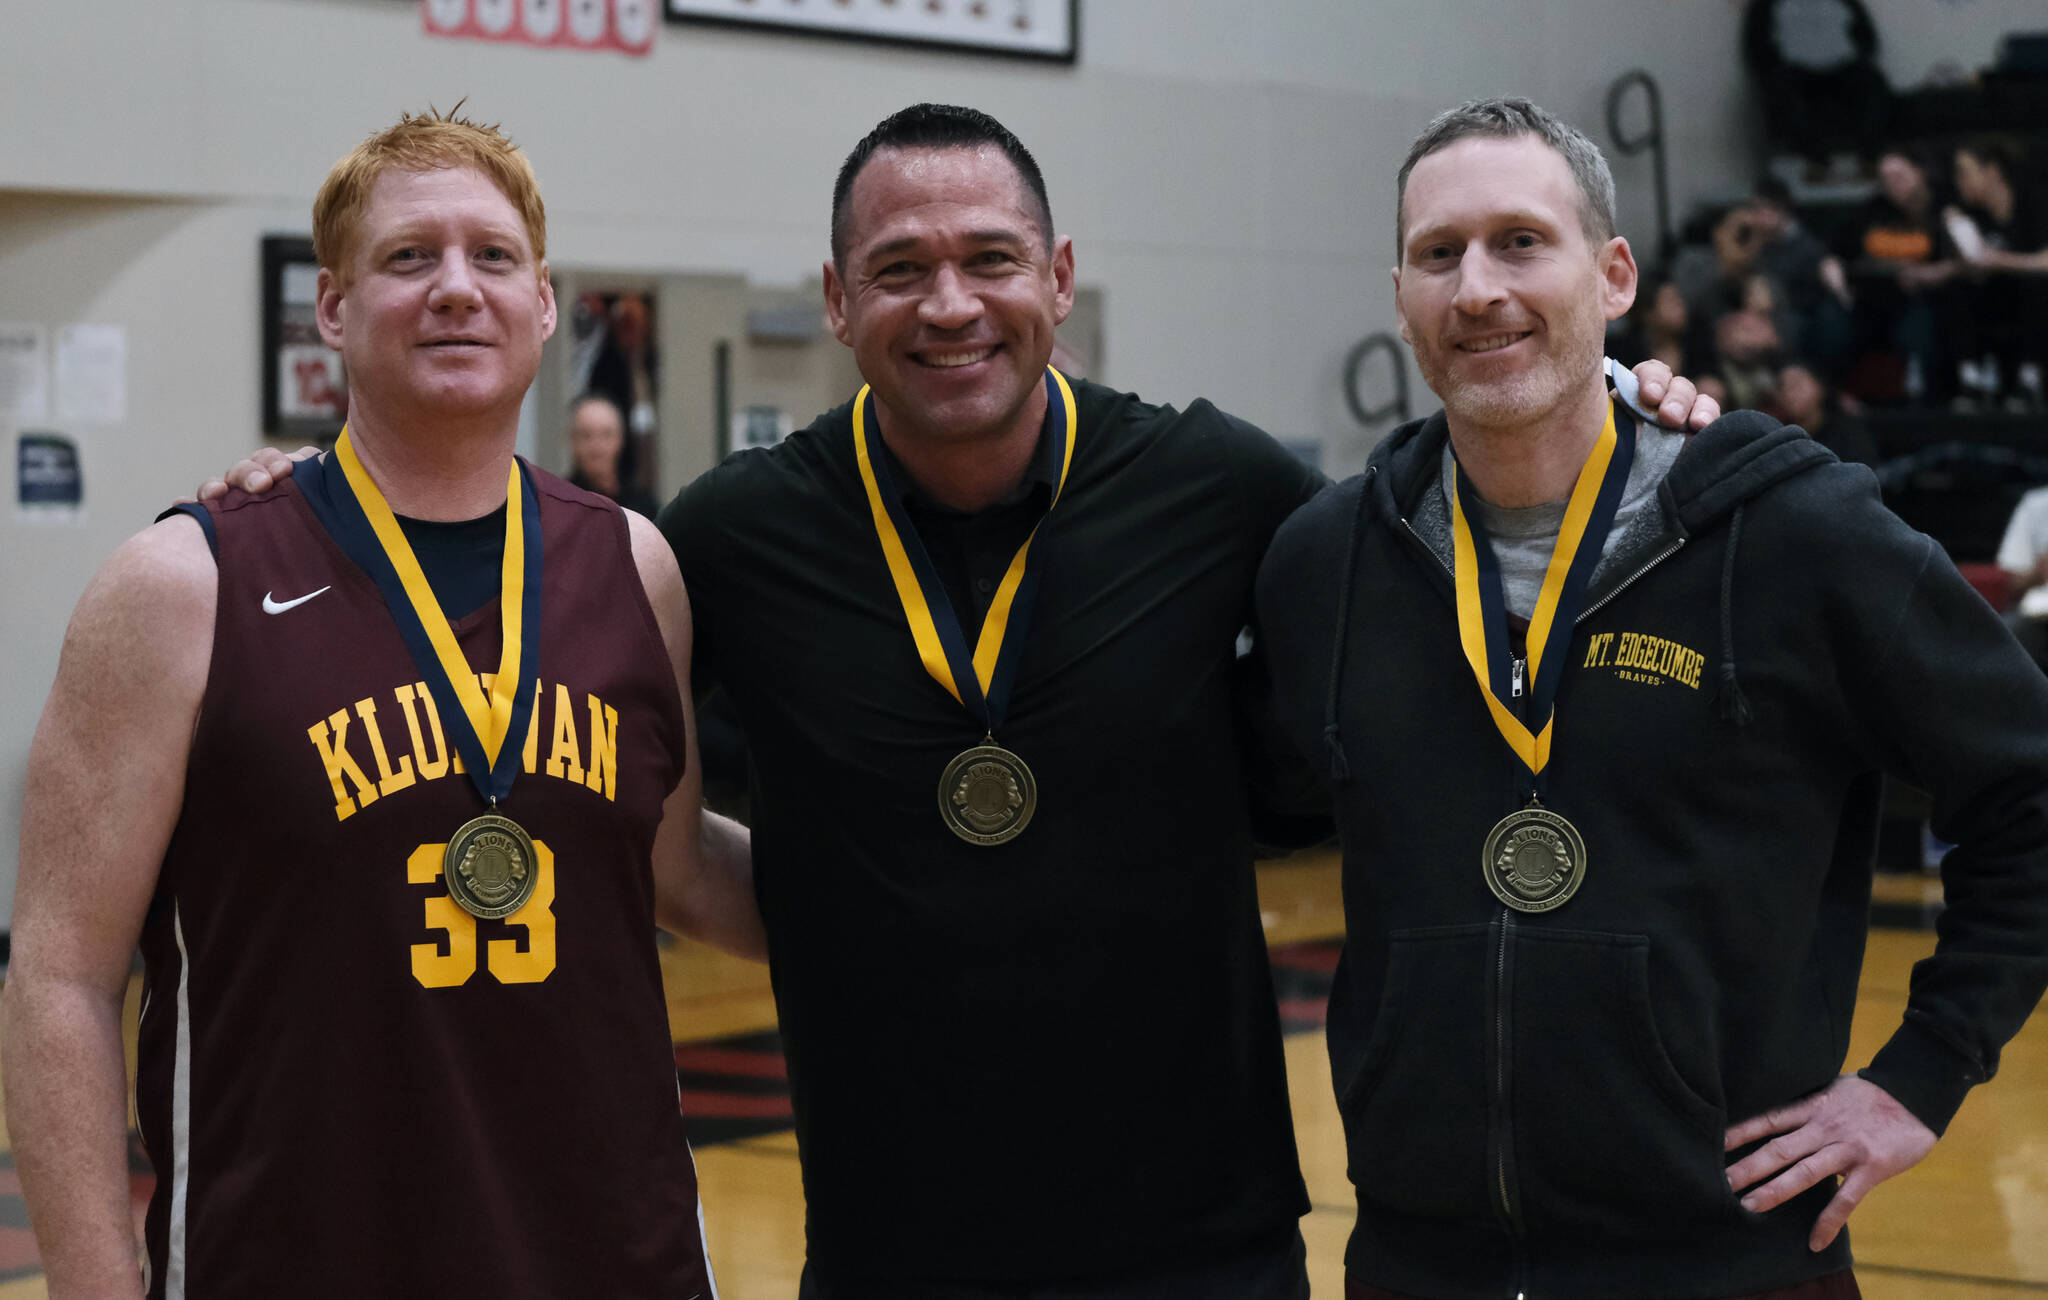 Jesse McGraw, Matt Carle and Andrew Friske pose for a photo after their induction into the Gold Medal Hall of Fame, Friday, March 24, during the Juneau Lions Club 74th Annual Gold Medal Basketball Tournament at the Juneau-Douglas High School: Yadaa.at Kalé gymnasium. (Klas Stolpe/For the Juneau Empire)